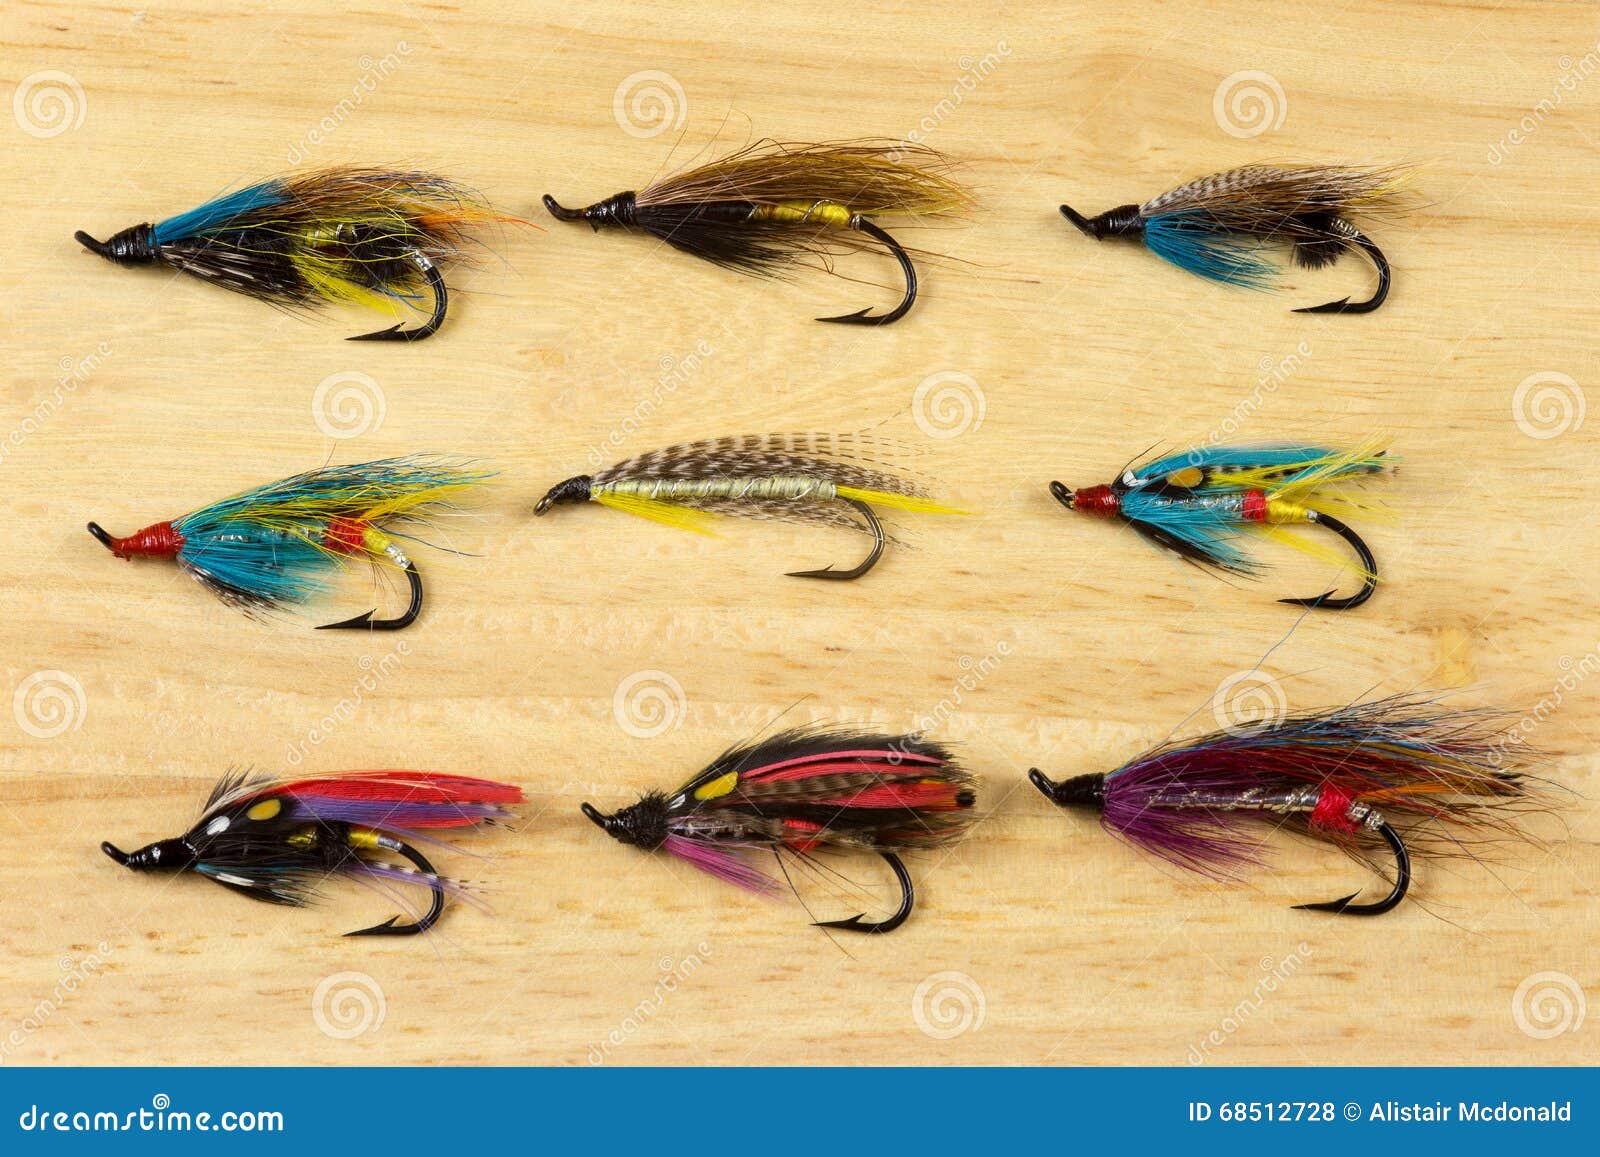 Traditional Salmon Fishing Flies on a Wooden Background Stock